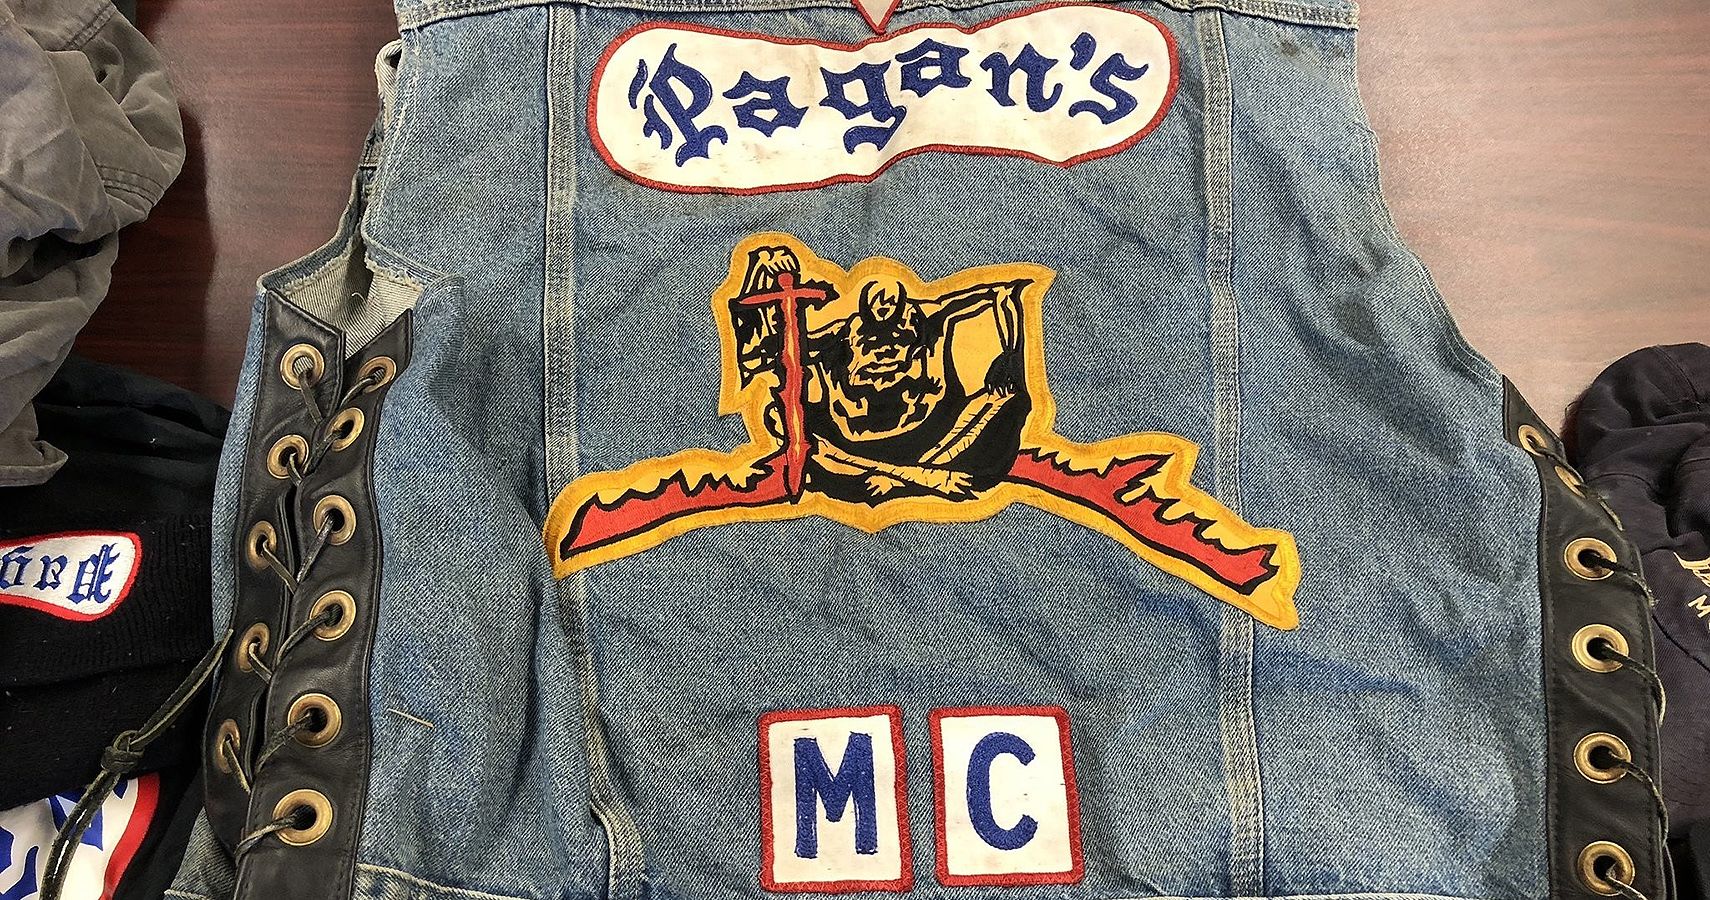 The Pagans MC Patch Comes From A Jack Kirby Illustration